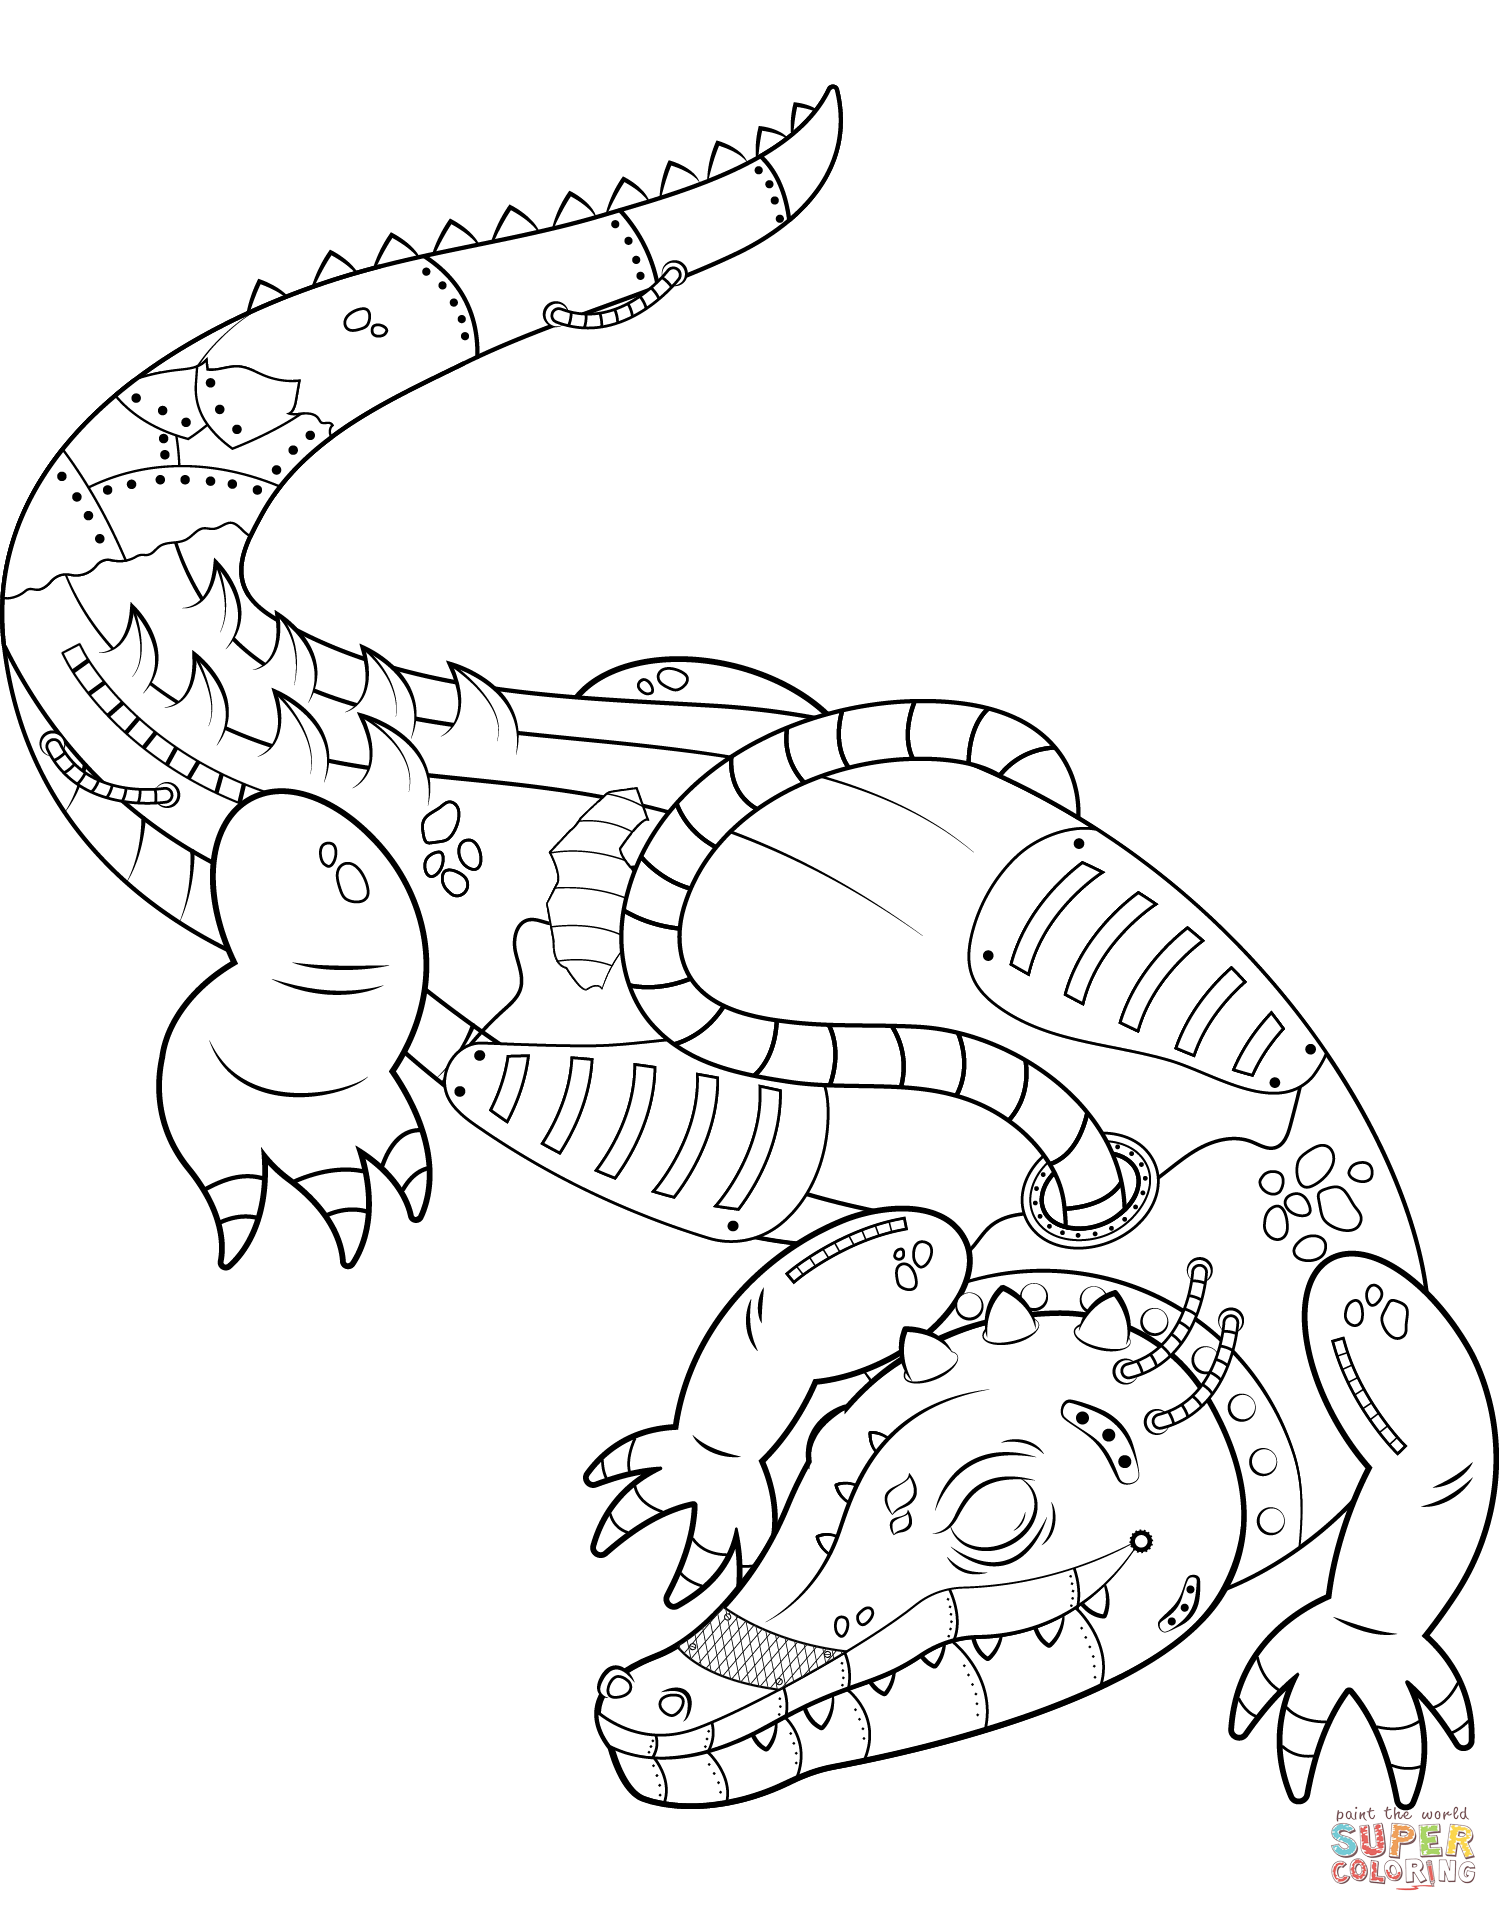 Steampunk alligator coloring page free printable coloring pages